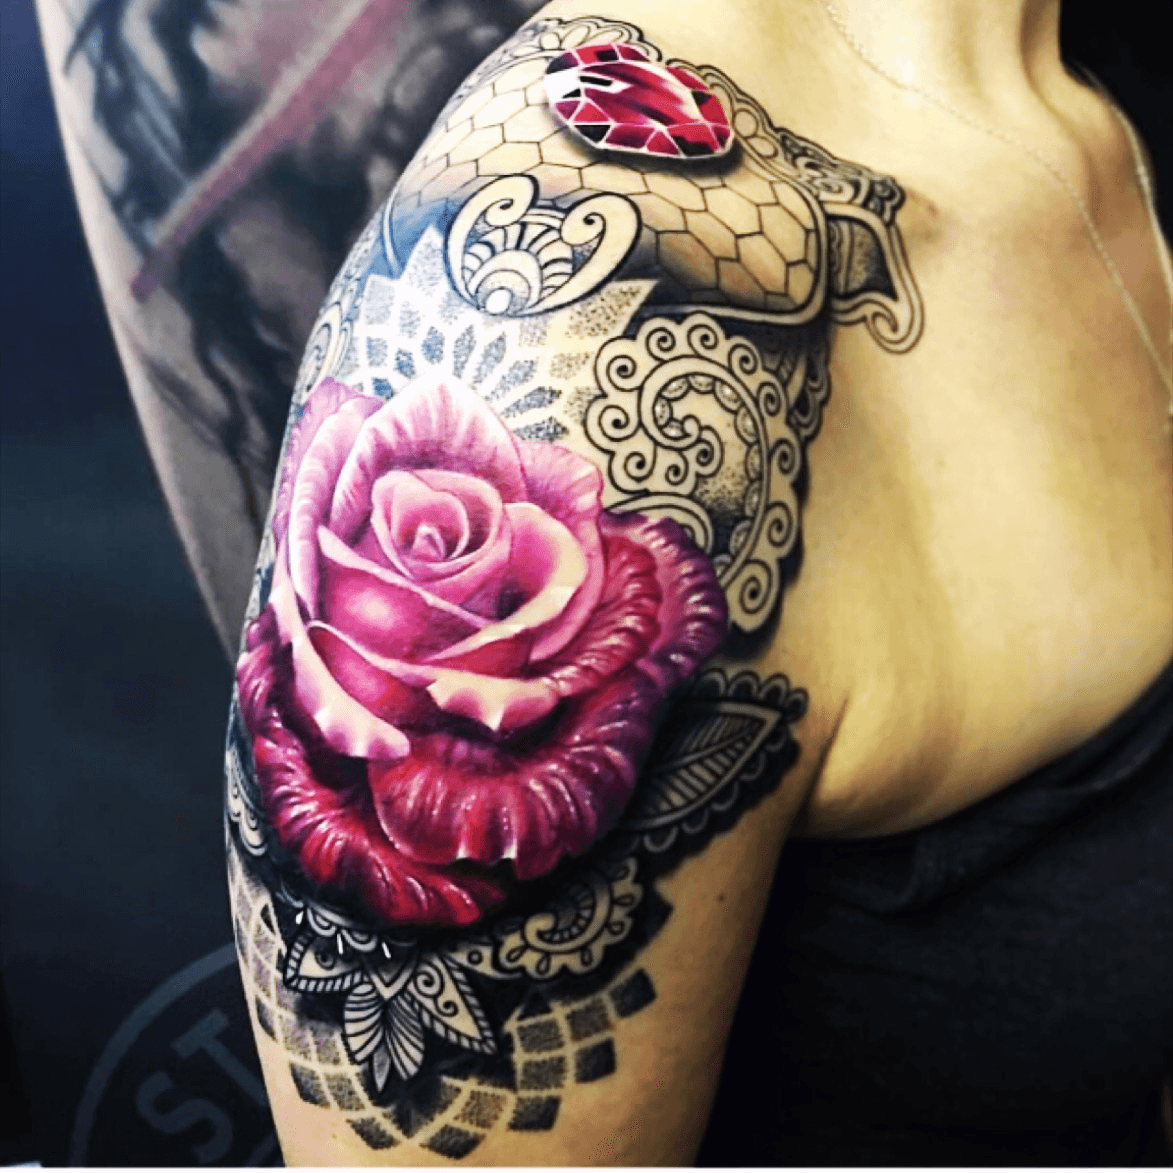 Beautiful rose tattoo idea design for a thigh arm by dzeraldas jerry  kudrevicius from Atlantic Coast tattoo Mandala   Rose tattoos Thigh  tattoo Mandala tattoo